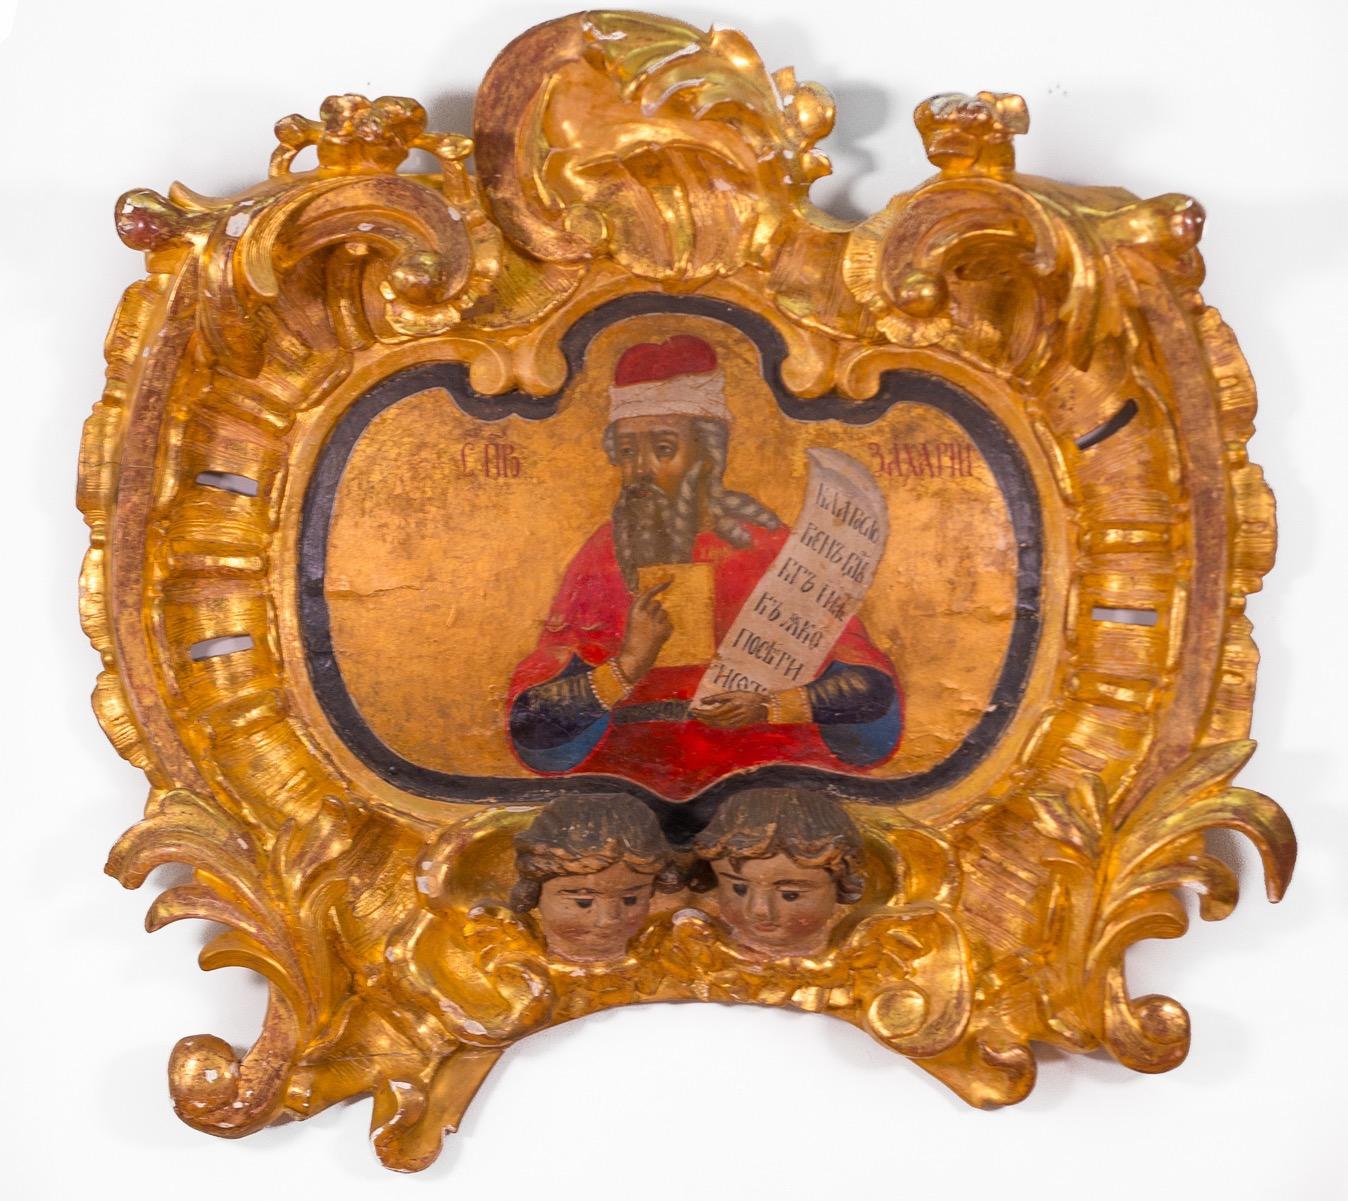 18th Century Russian Orthodox icon of the prophet Zachariah painted on an ornate solid slab of wood with an incorporated gold gilded frame that has been carved with a rococo design of deep scrolls and high relief. Incorporating at the base are two